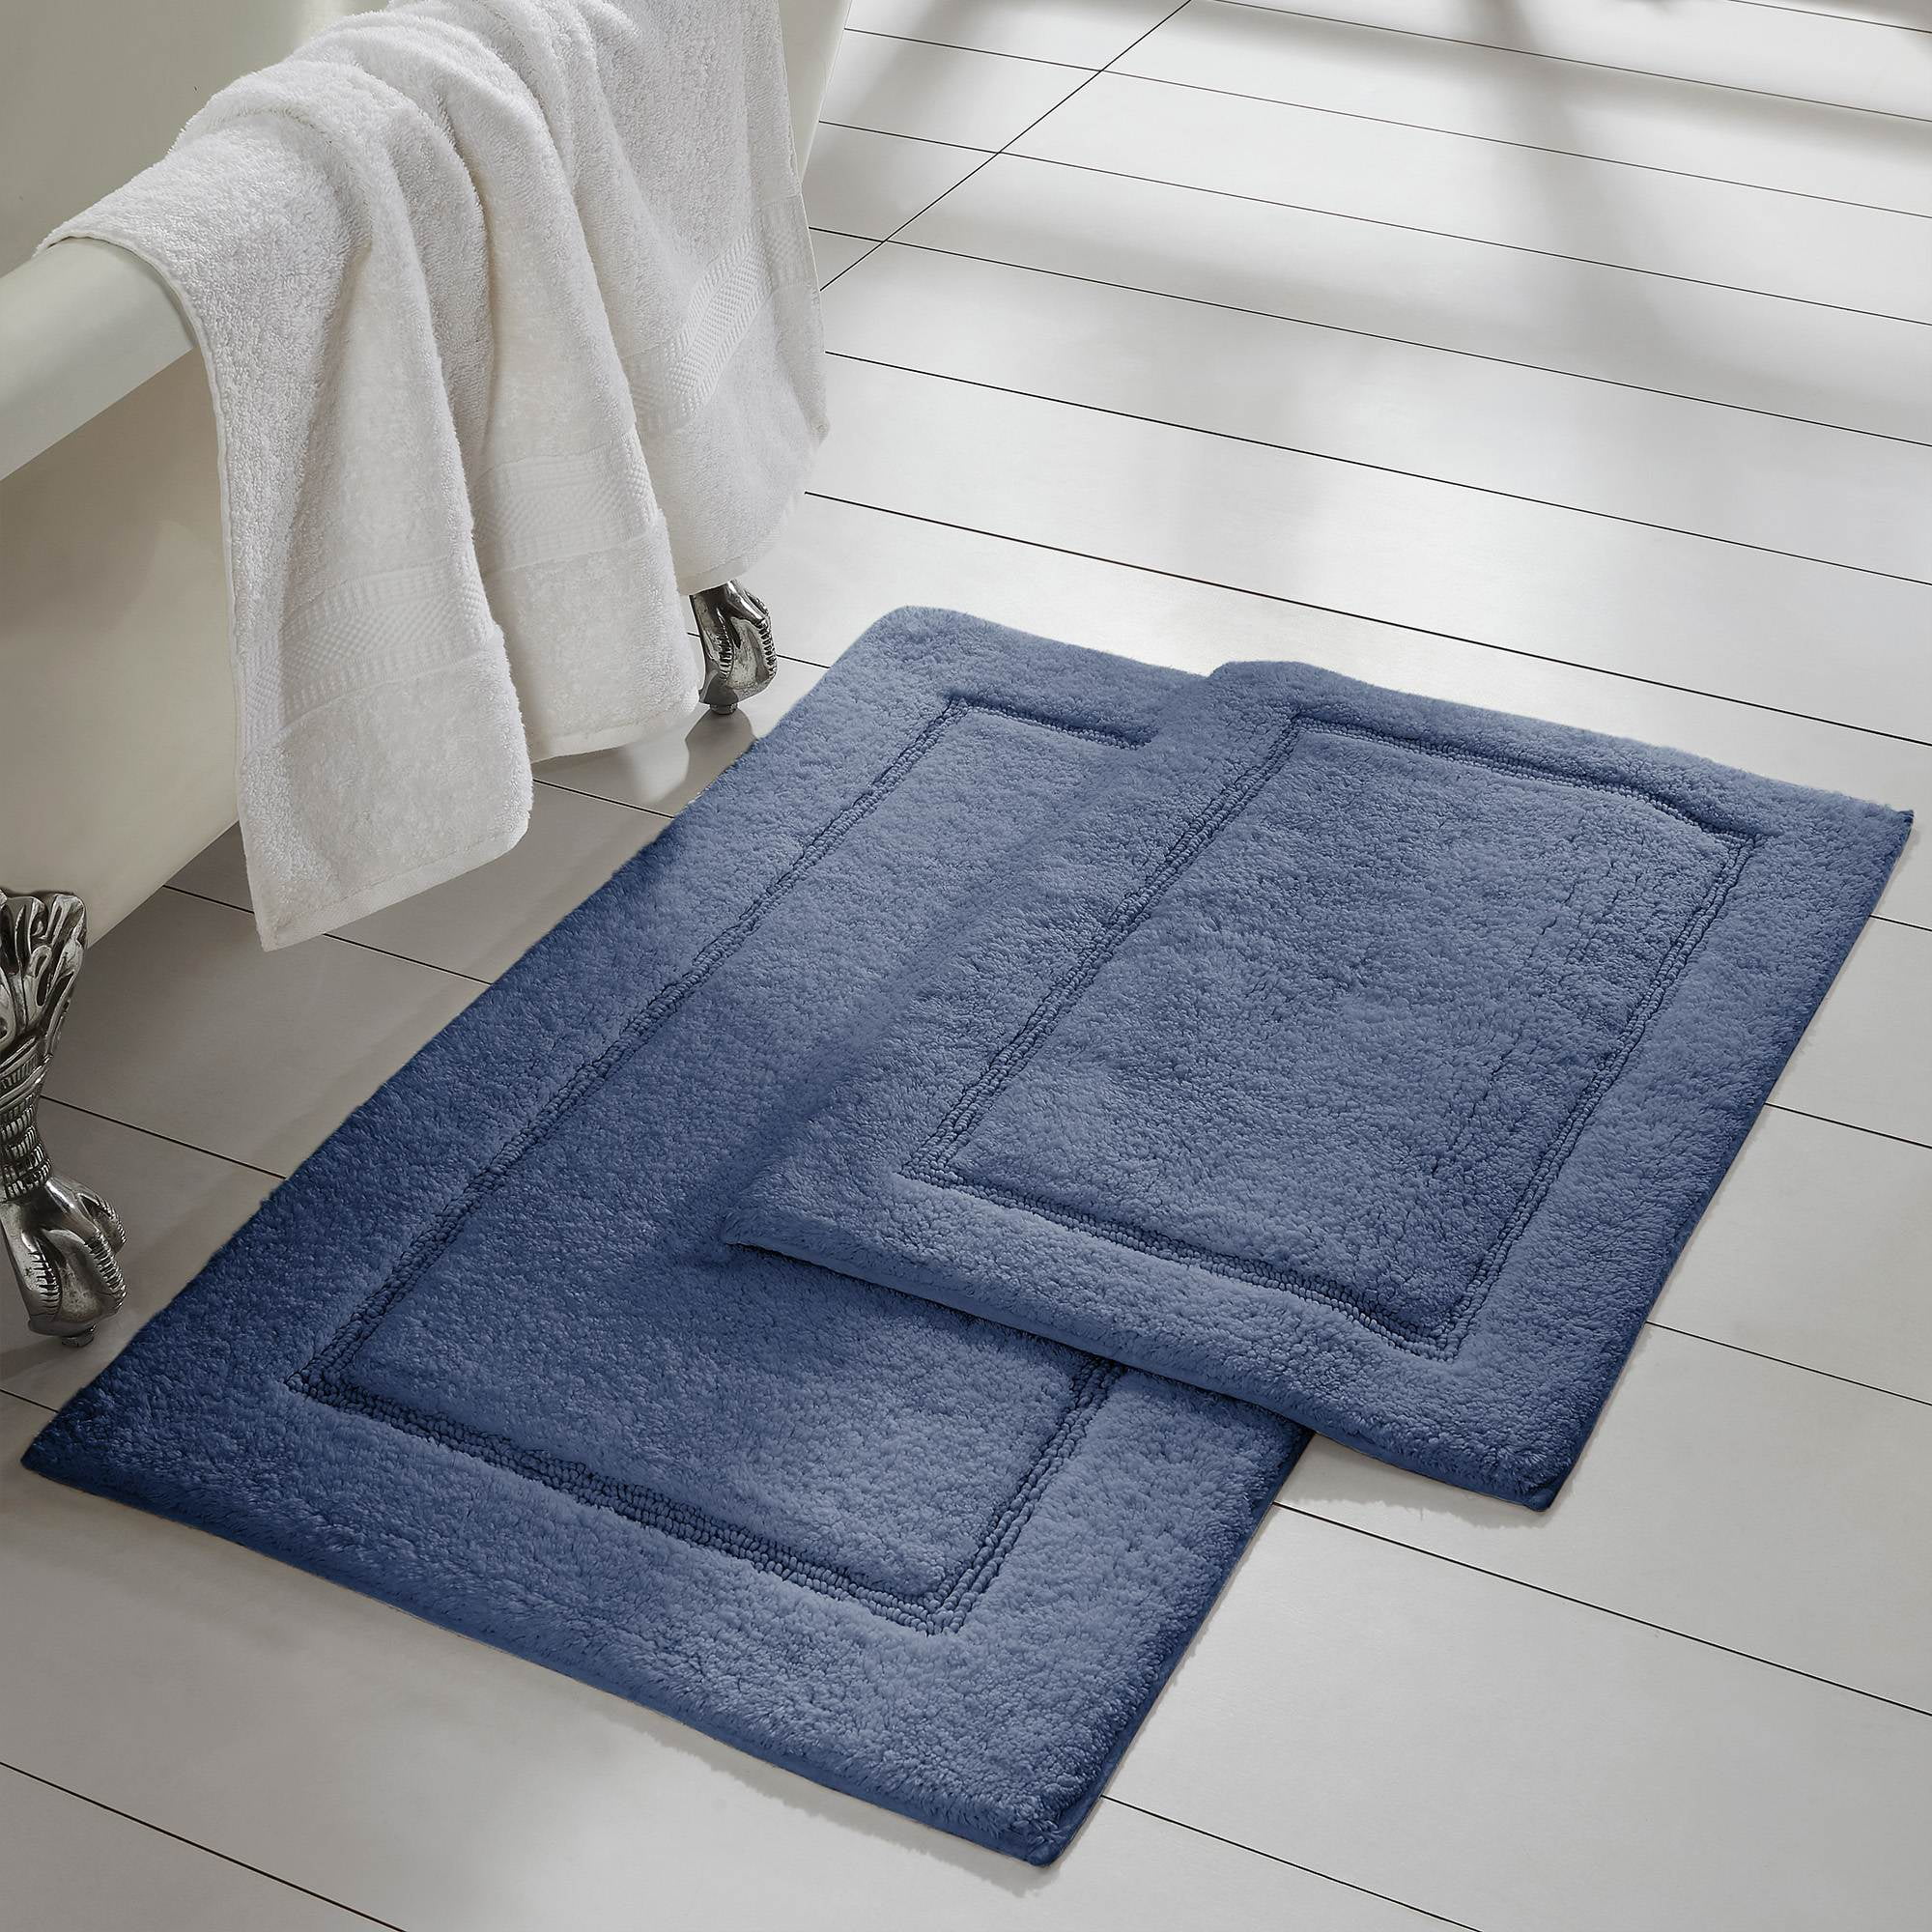 Linen Crochet 2-Piece Bath Rug Set 21 by 34-Inch and 17 by 24-Inch 